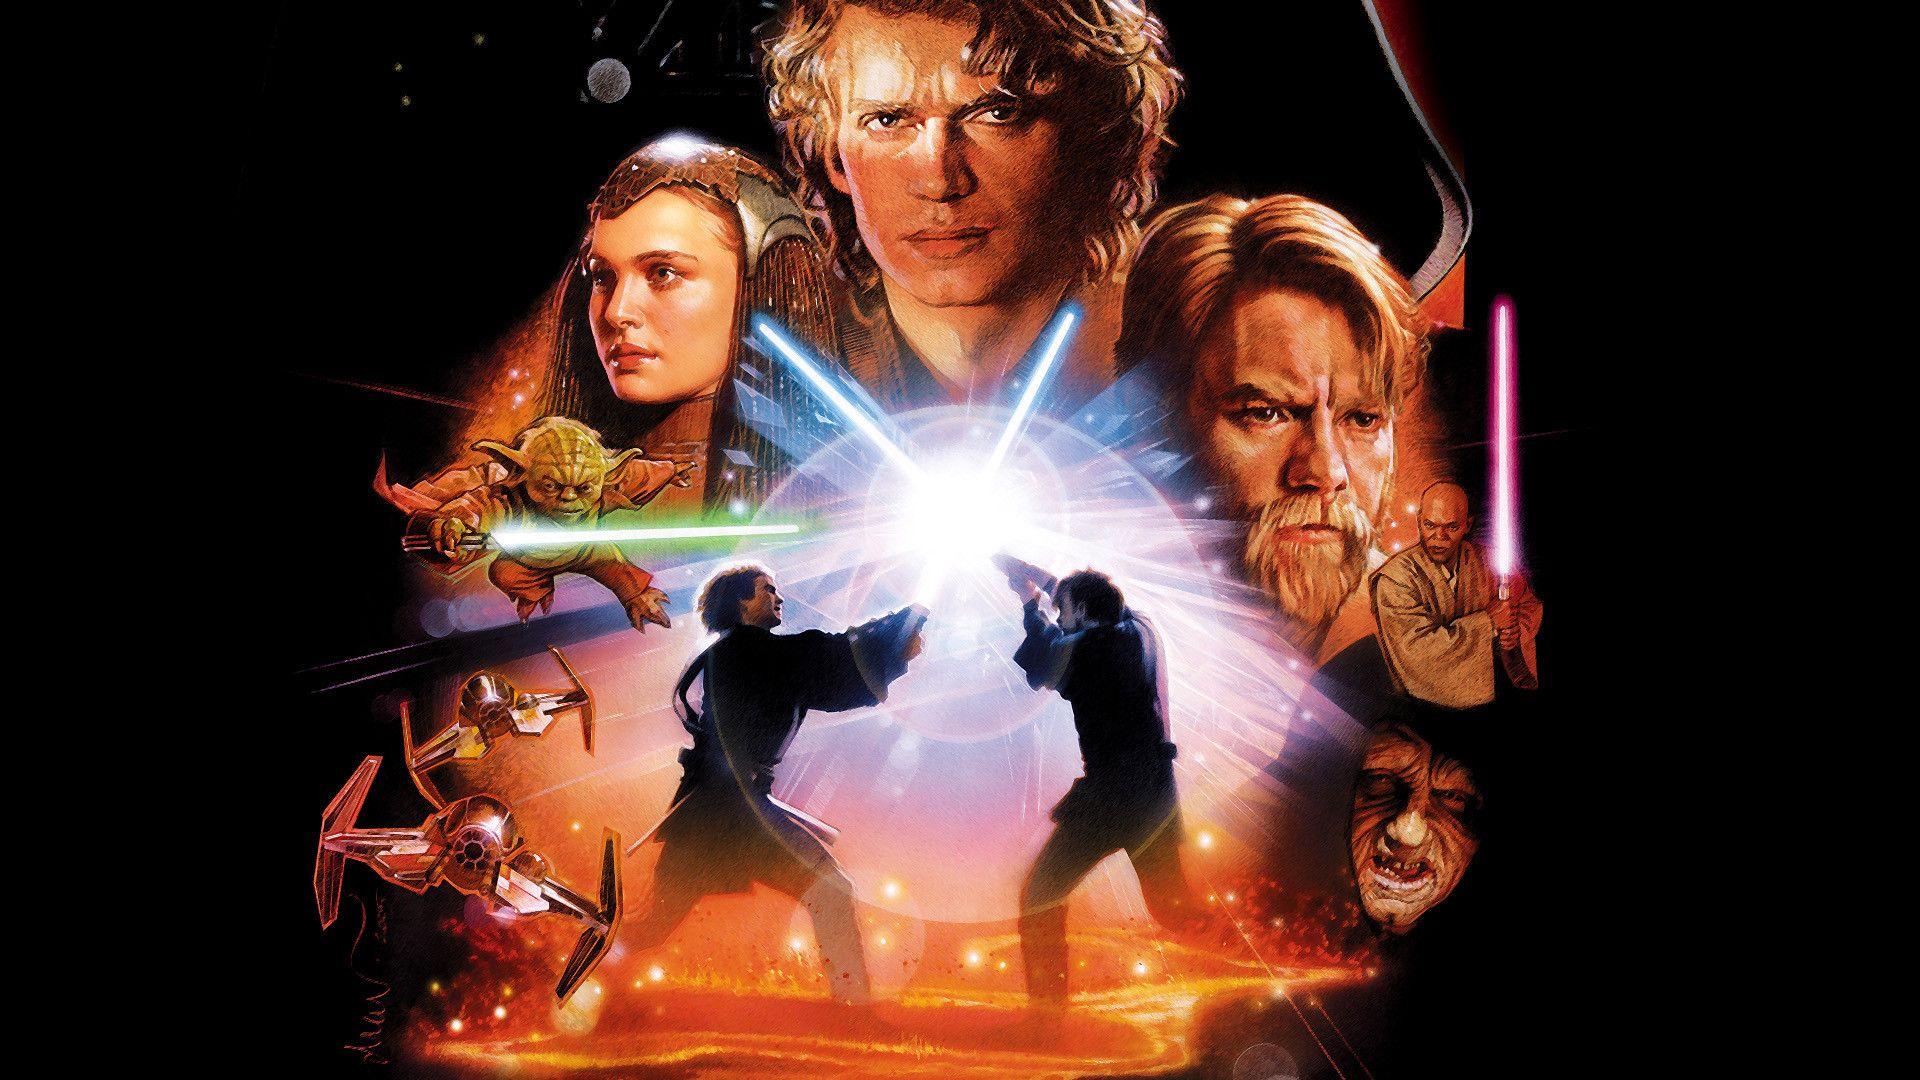 Star Wars Episode III: Revenge of the Sith Full HD Wallpapers and.